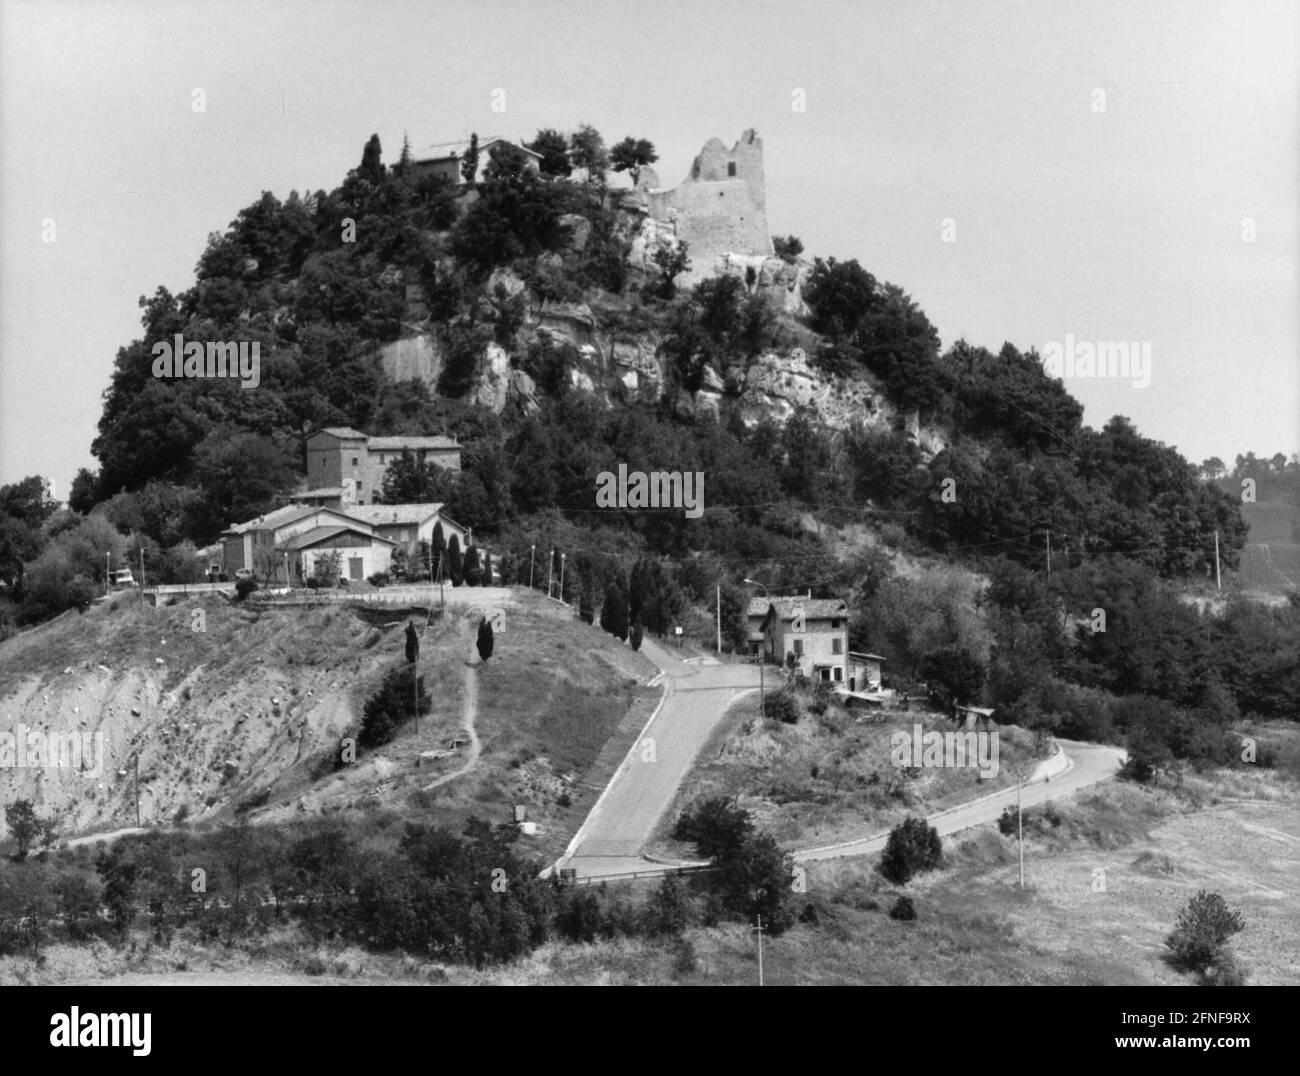 Ruins of the castle of Canossa in the Appenines. Here the German Emperor Henry IV asked Pope Gregory VII to lift the church ban. [automated translation] Stock Photo